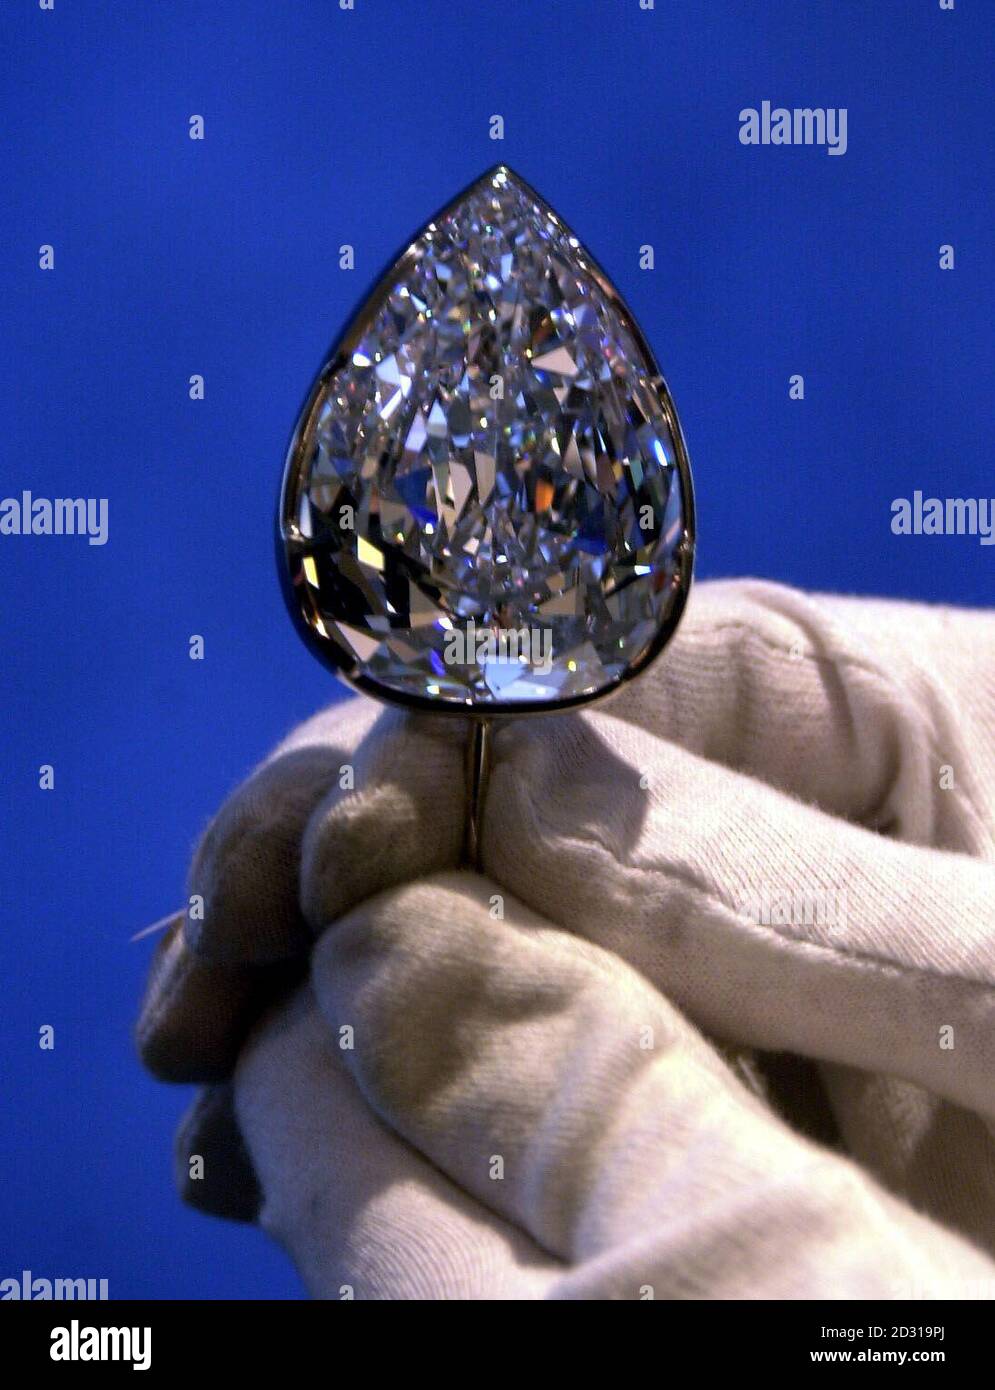 The 203 carat Millennium Star, the largest flawless pear-shaped diamond in the world, which formed part of a display worth  350 million that a 12 strong gang of robbers attempted to steal on 07/11/00 from the Millennium Dome.  * ....in the Money Zone, using an earth digger, smoke bombs and a powerboat.  * 08/11/2001: Police foiled the 'robbery' of the jewels when they caught raiders red handed as they smashed their way in using a mechanical digger, an Old Bailey court heard, at the opening of the trial of six men accused of plotting to rob the De Beers Millennium Diamond Exhibition with others Stock Photo